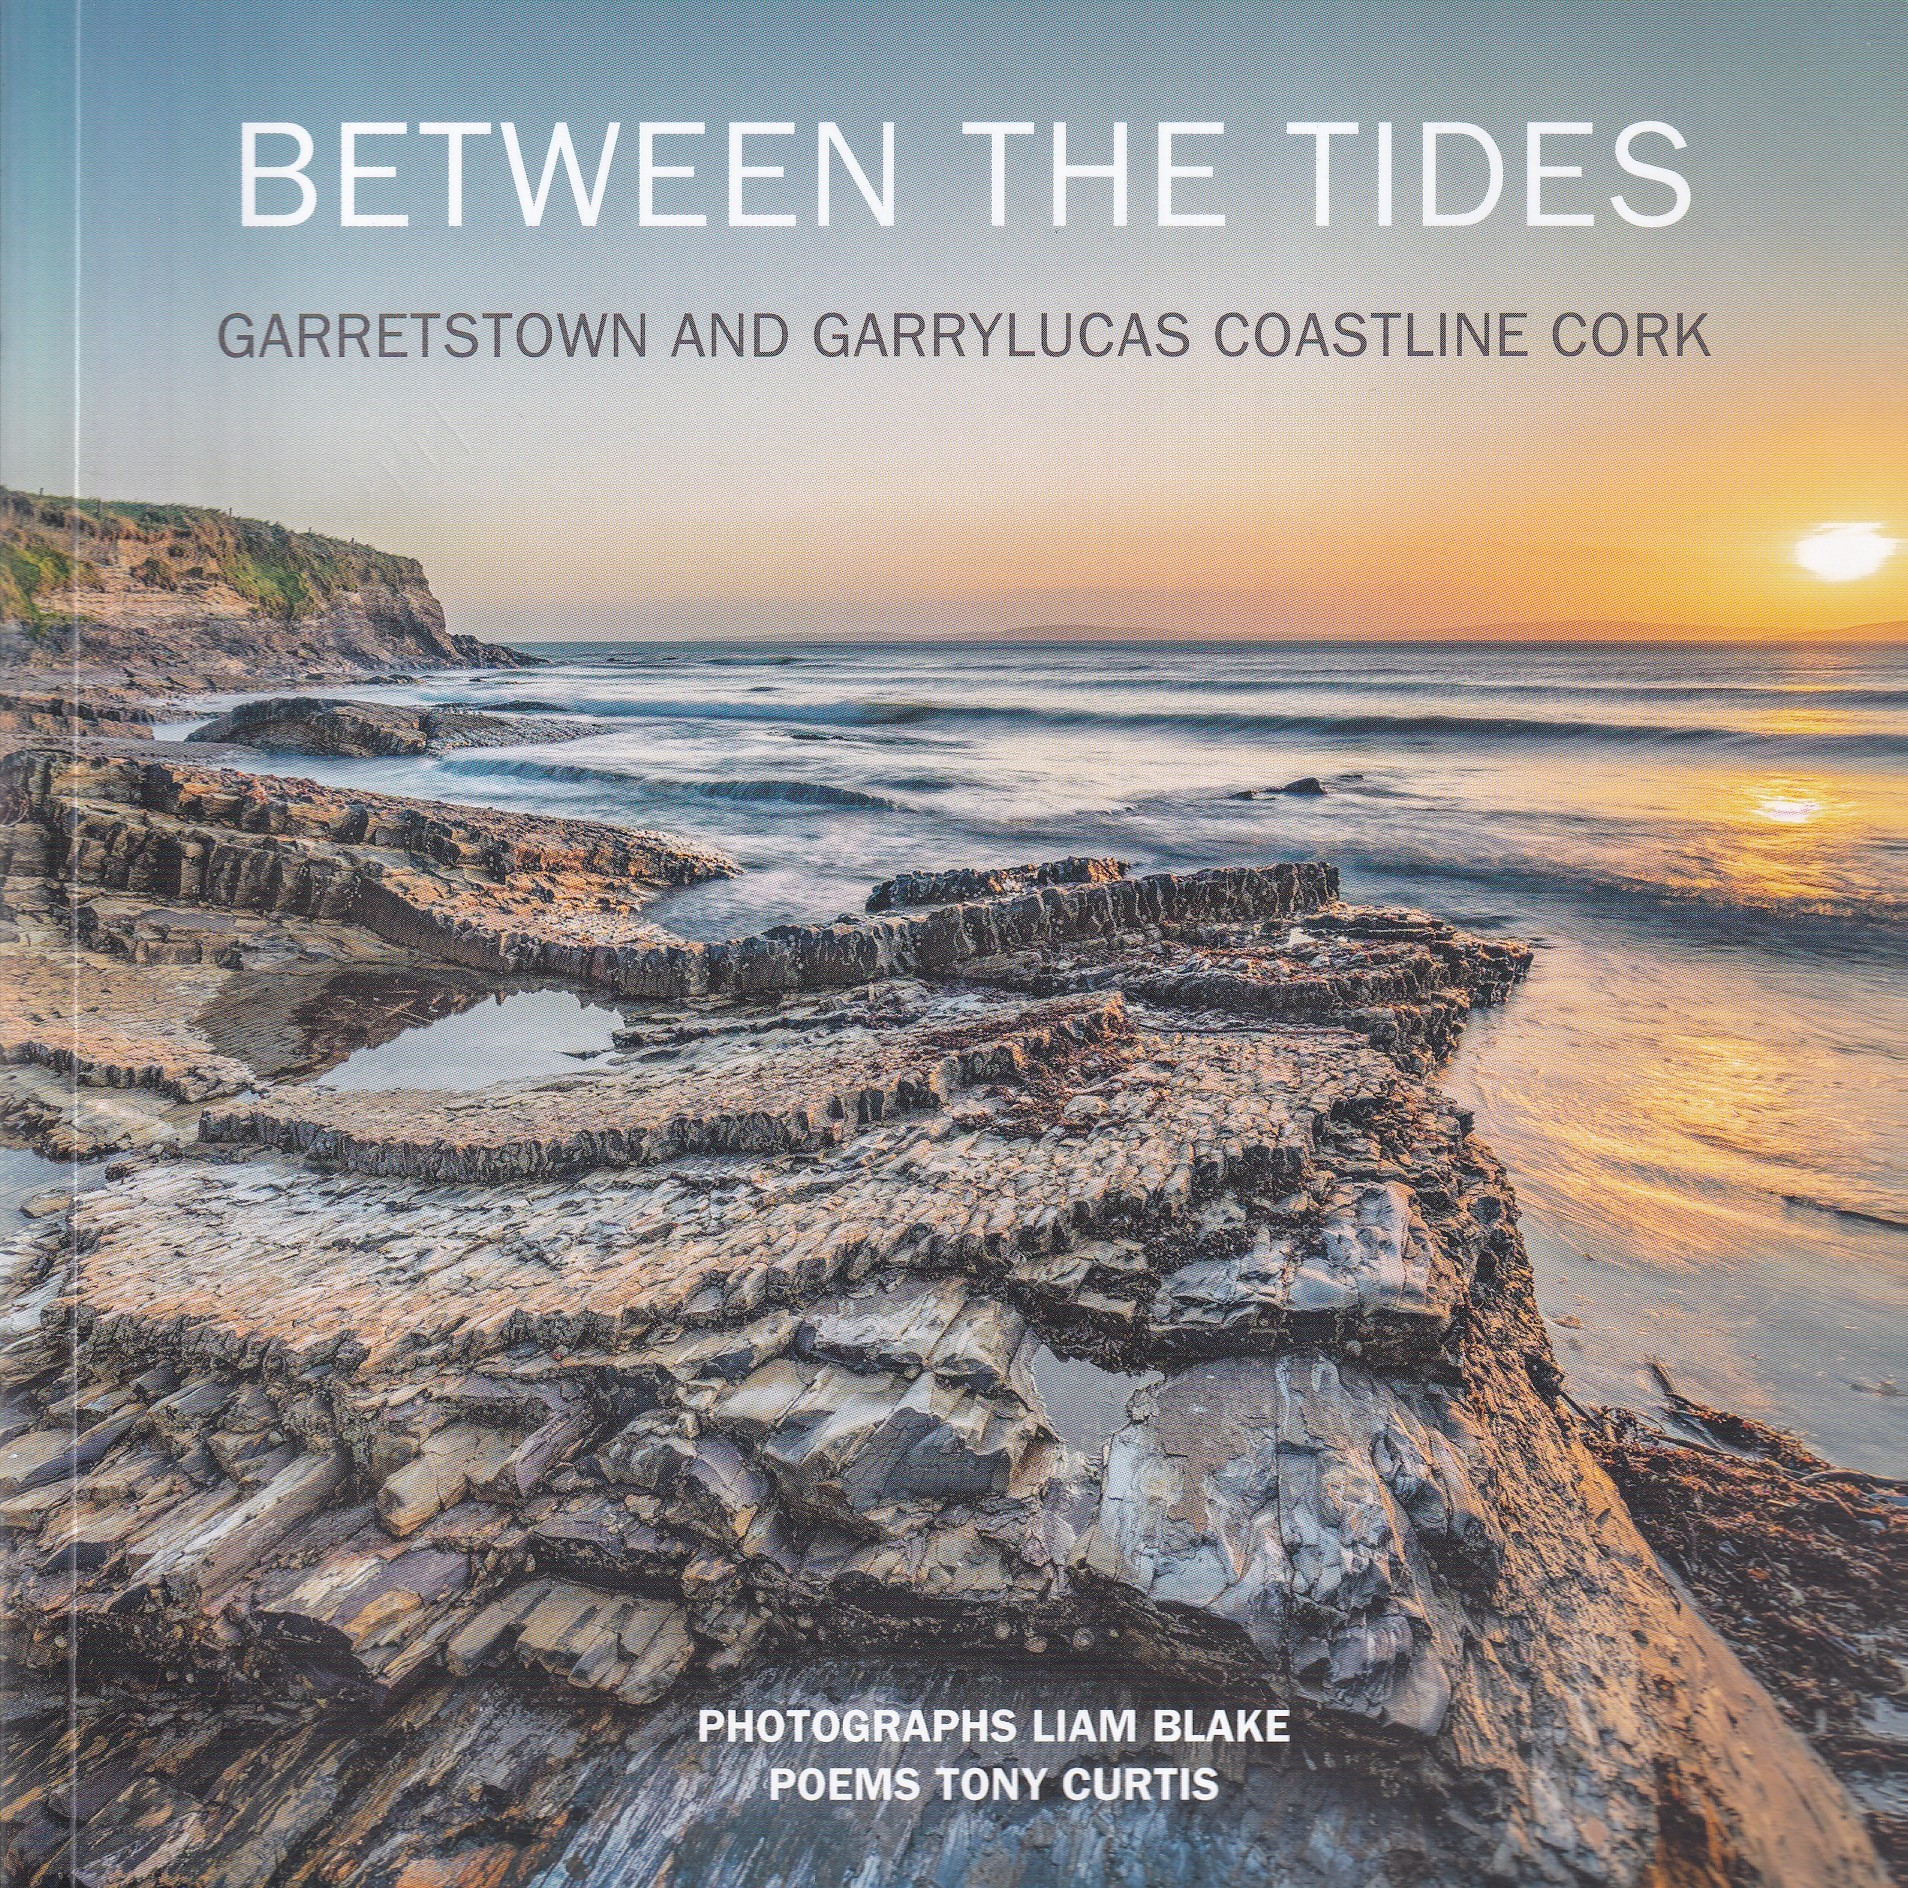 Between The Tides: Garretstown and Garrylucas Coastline Cork – Signed by Tony Curtis and Liam Blake